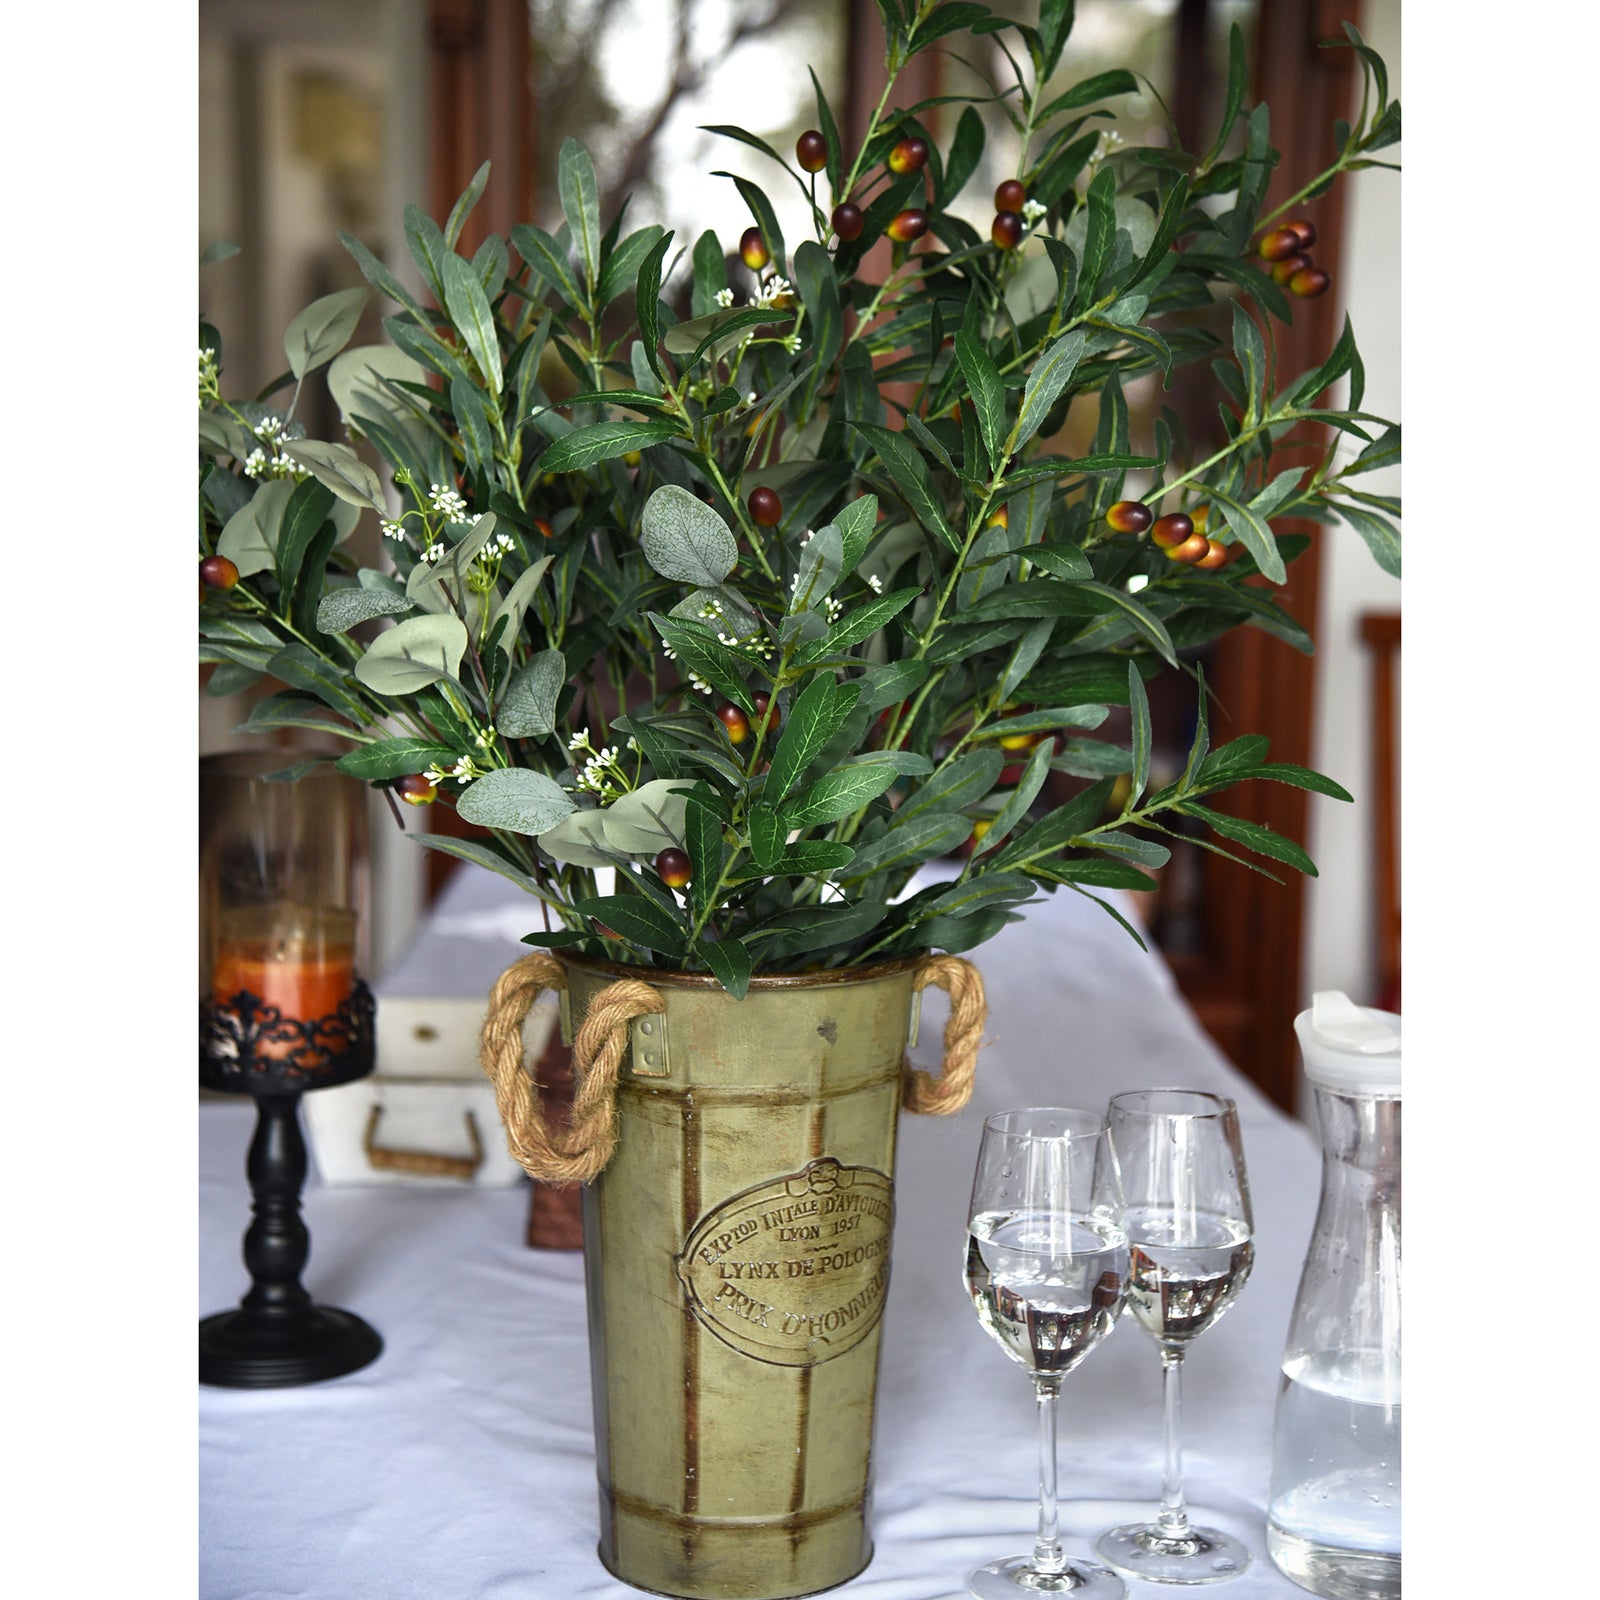 6 Stems Premium Quality Artificial Olive Leaves and Branches Greenery Floral Arrangement Decoration 31 inches (78cm)